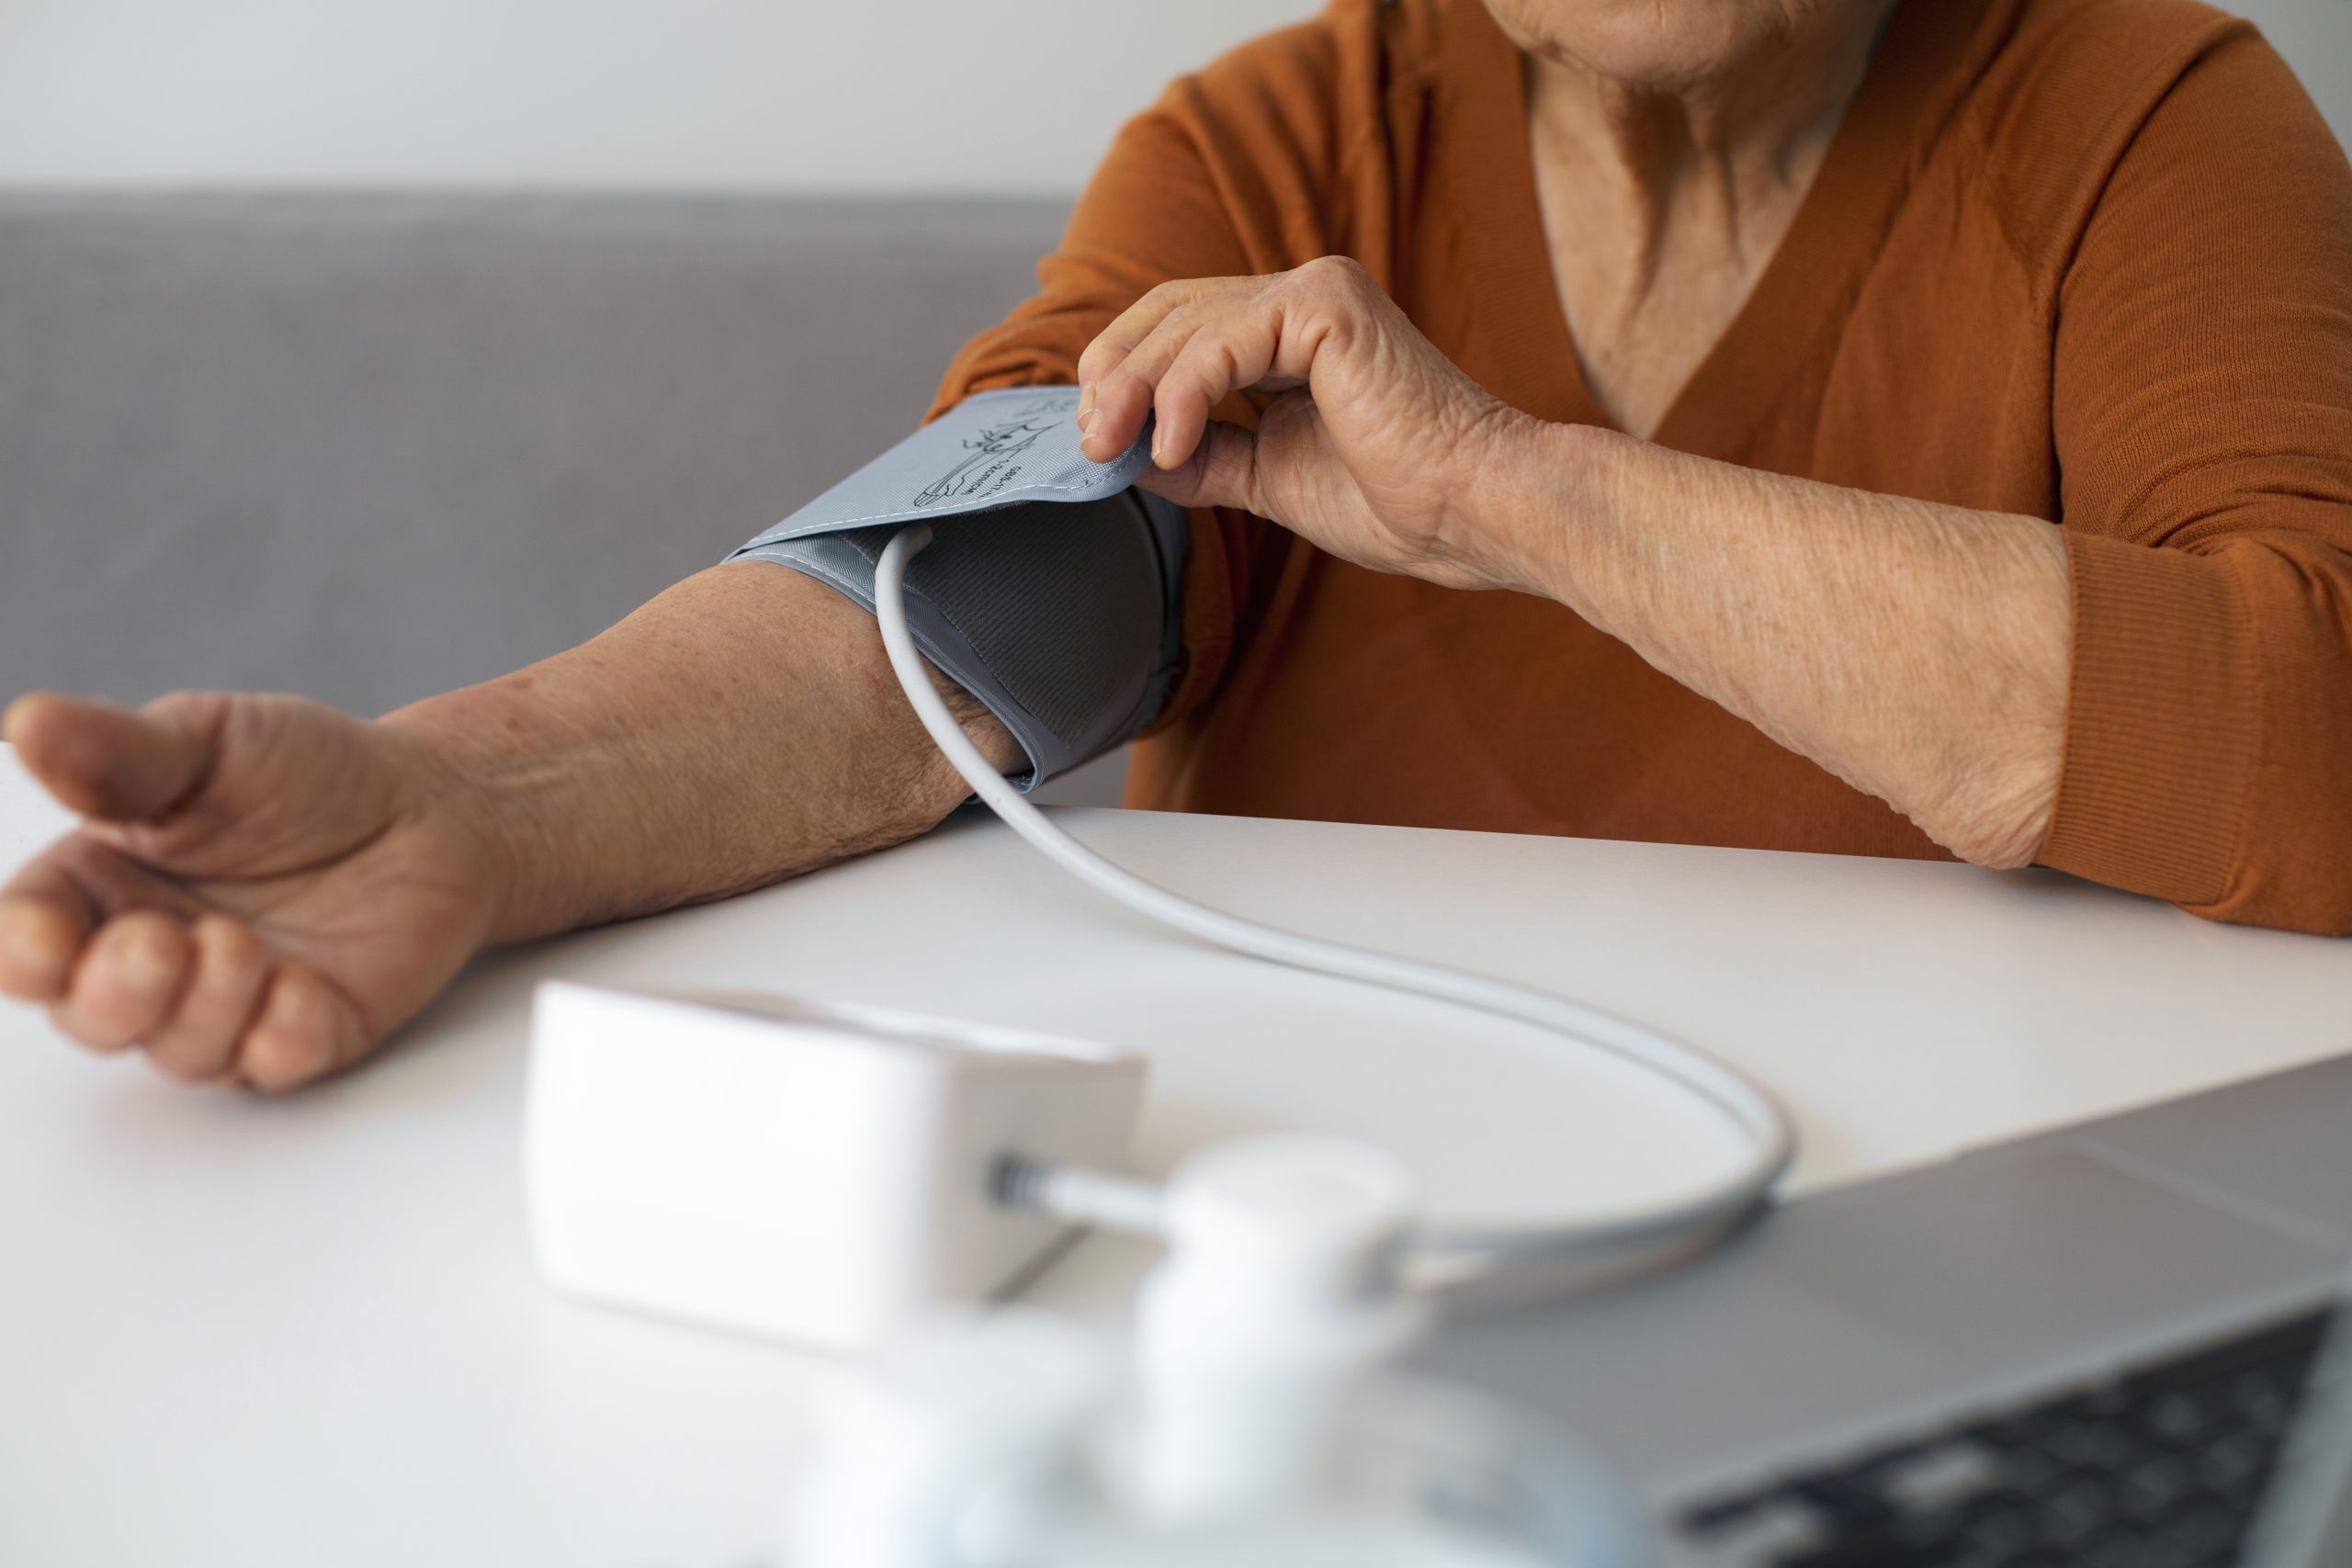 Choosing & Using a Home Blood Pressure Monitor, & What to Ask the Doctor